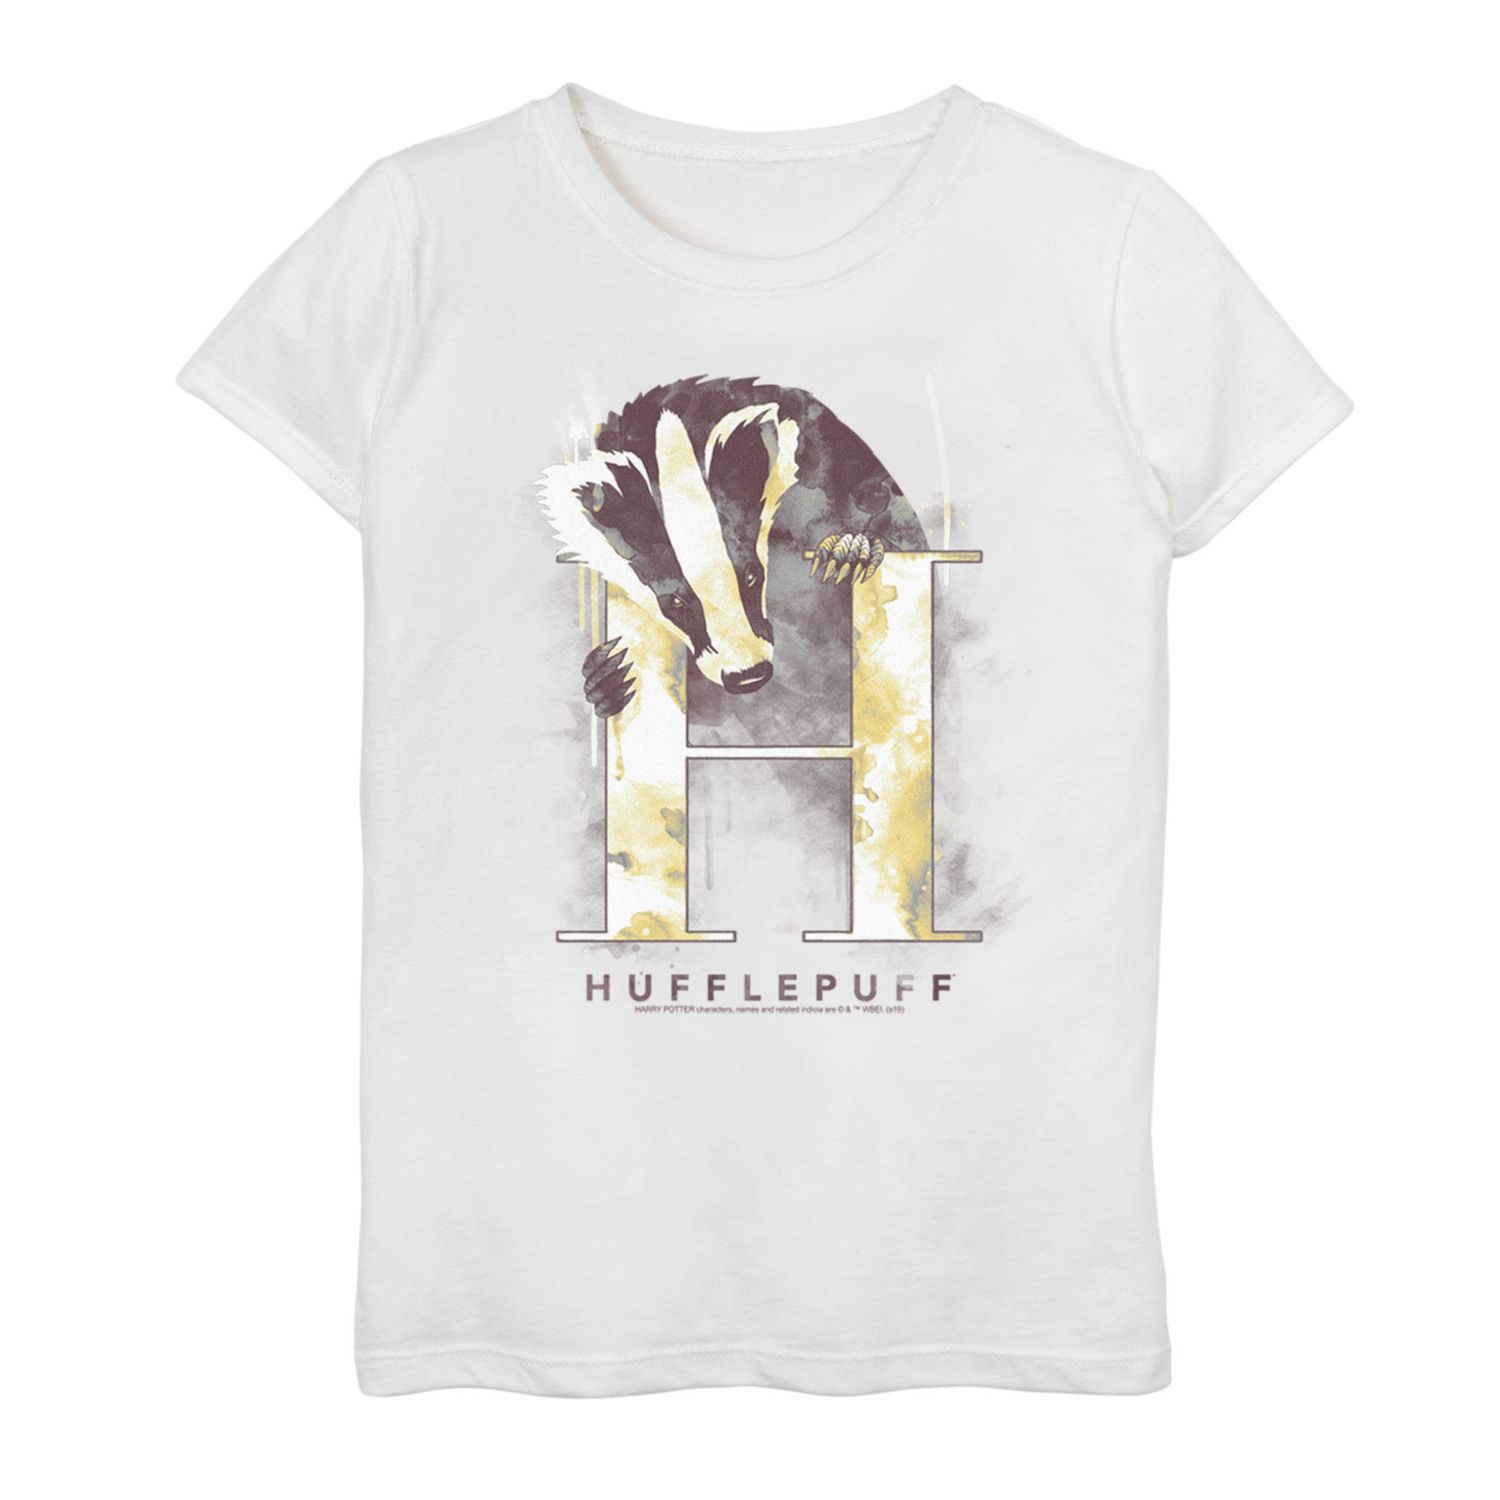 Image for Harry Potter Girls 7-16 Hufflepuff House Watercolor Graphic Tee at Kohl's.